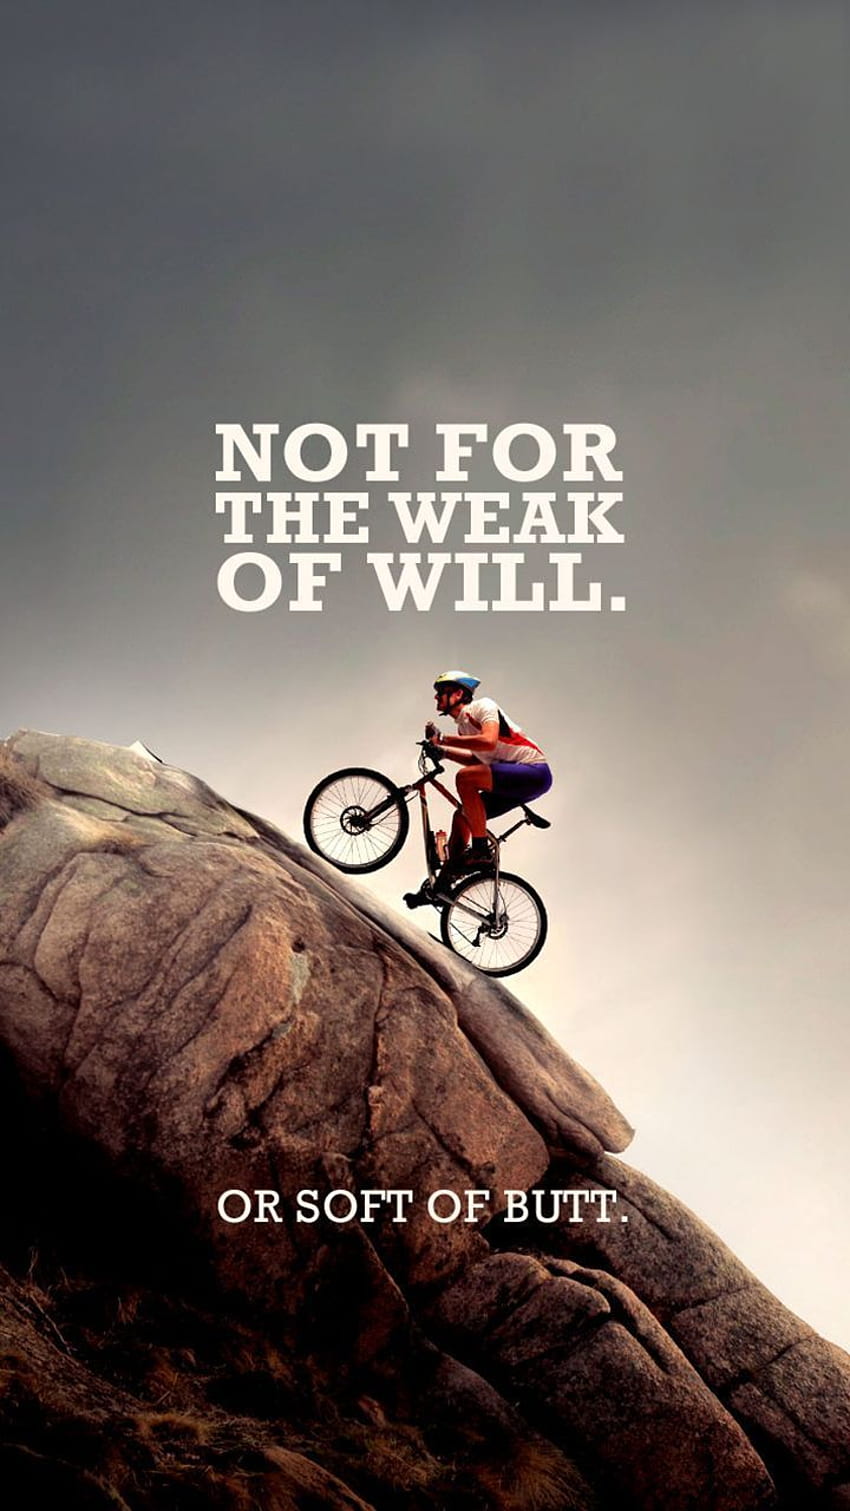 Empowering fitness for your smartphone. Mountain biking quotes, Bike quotes, Bike ride, MT Bike HD phone wallpaper